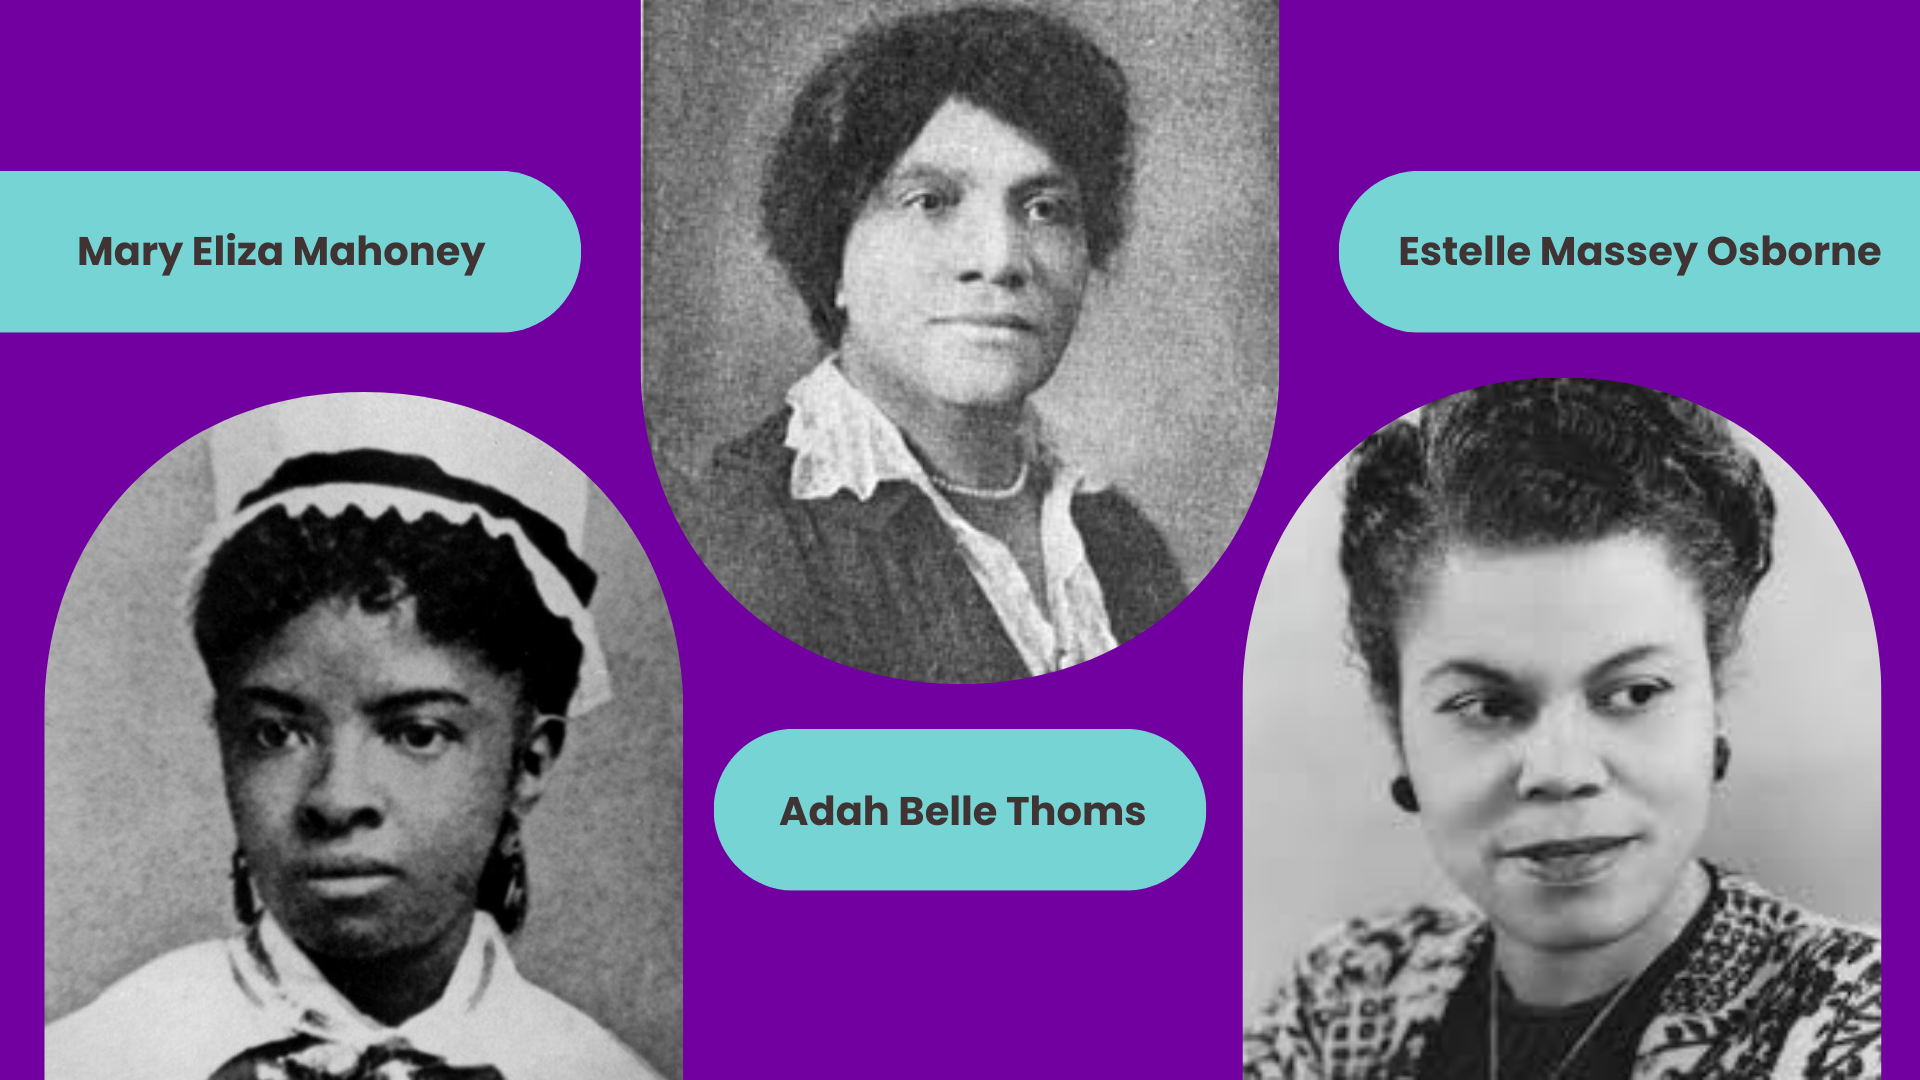 A collage that honors black nurses in history, including Mary Eliza Mahoney, Adah Belle Thoms, and Estelle Massey Osborne.